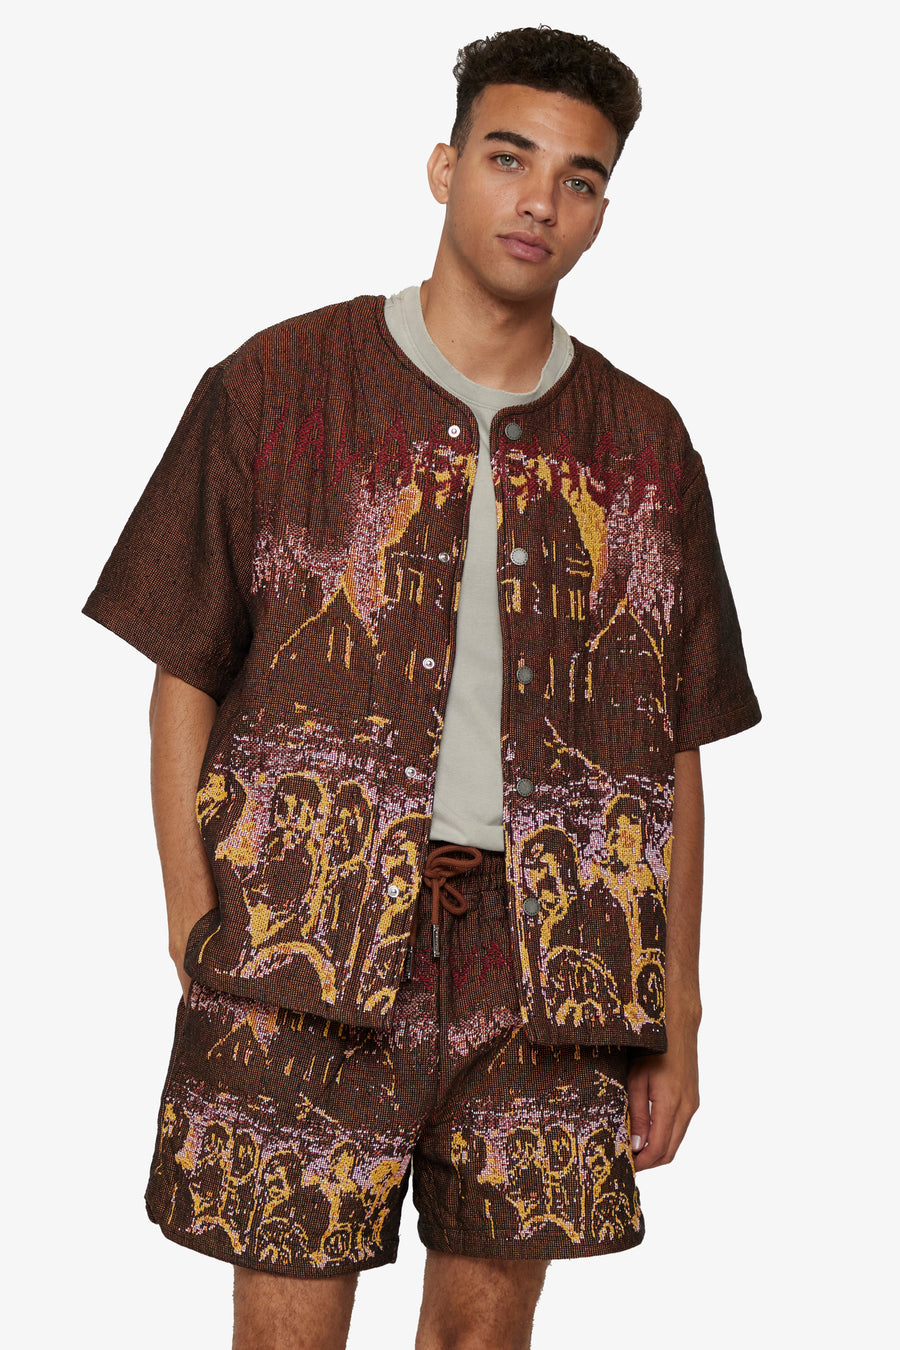 VALABASAS TAPESTRY BUTTON UP "GHOST HAND" BROWN